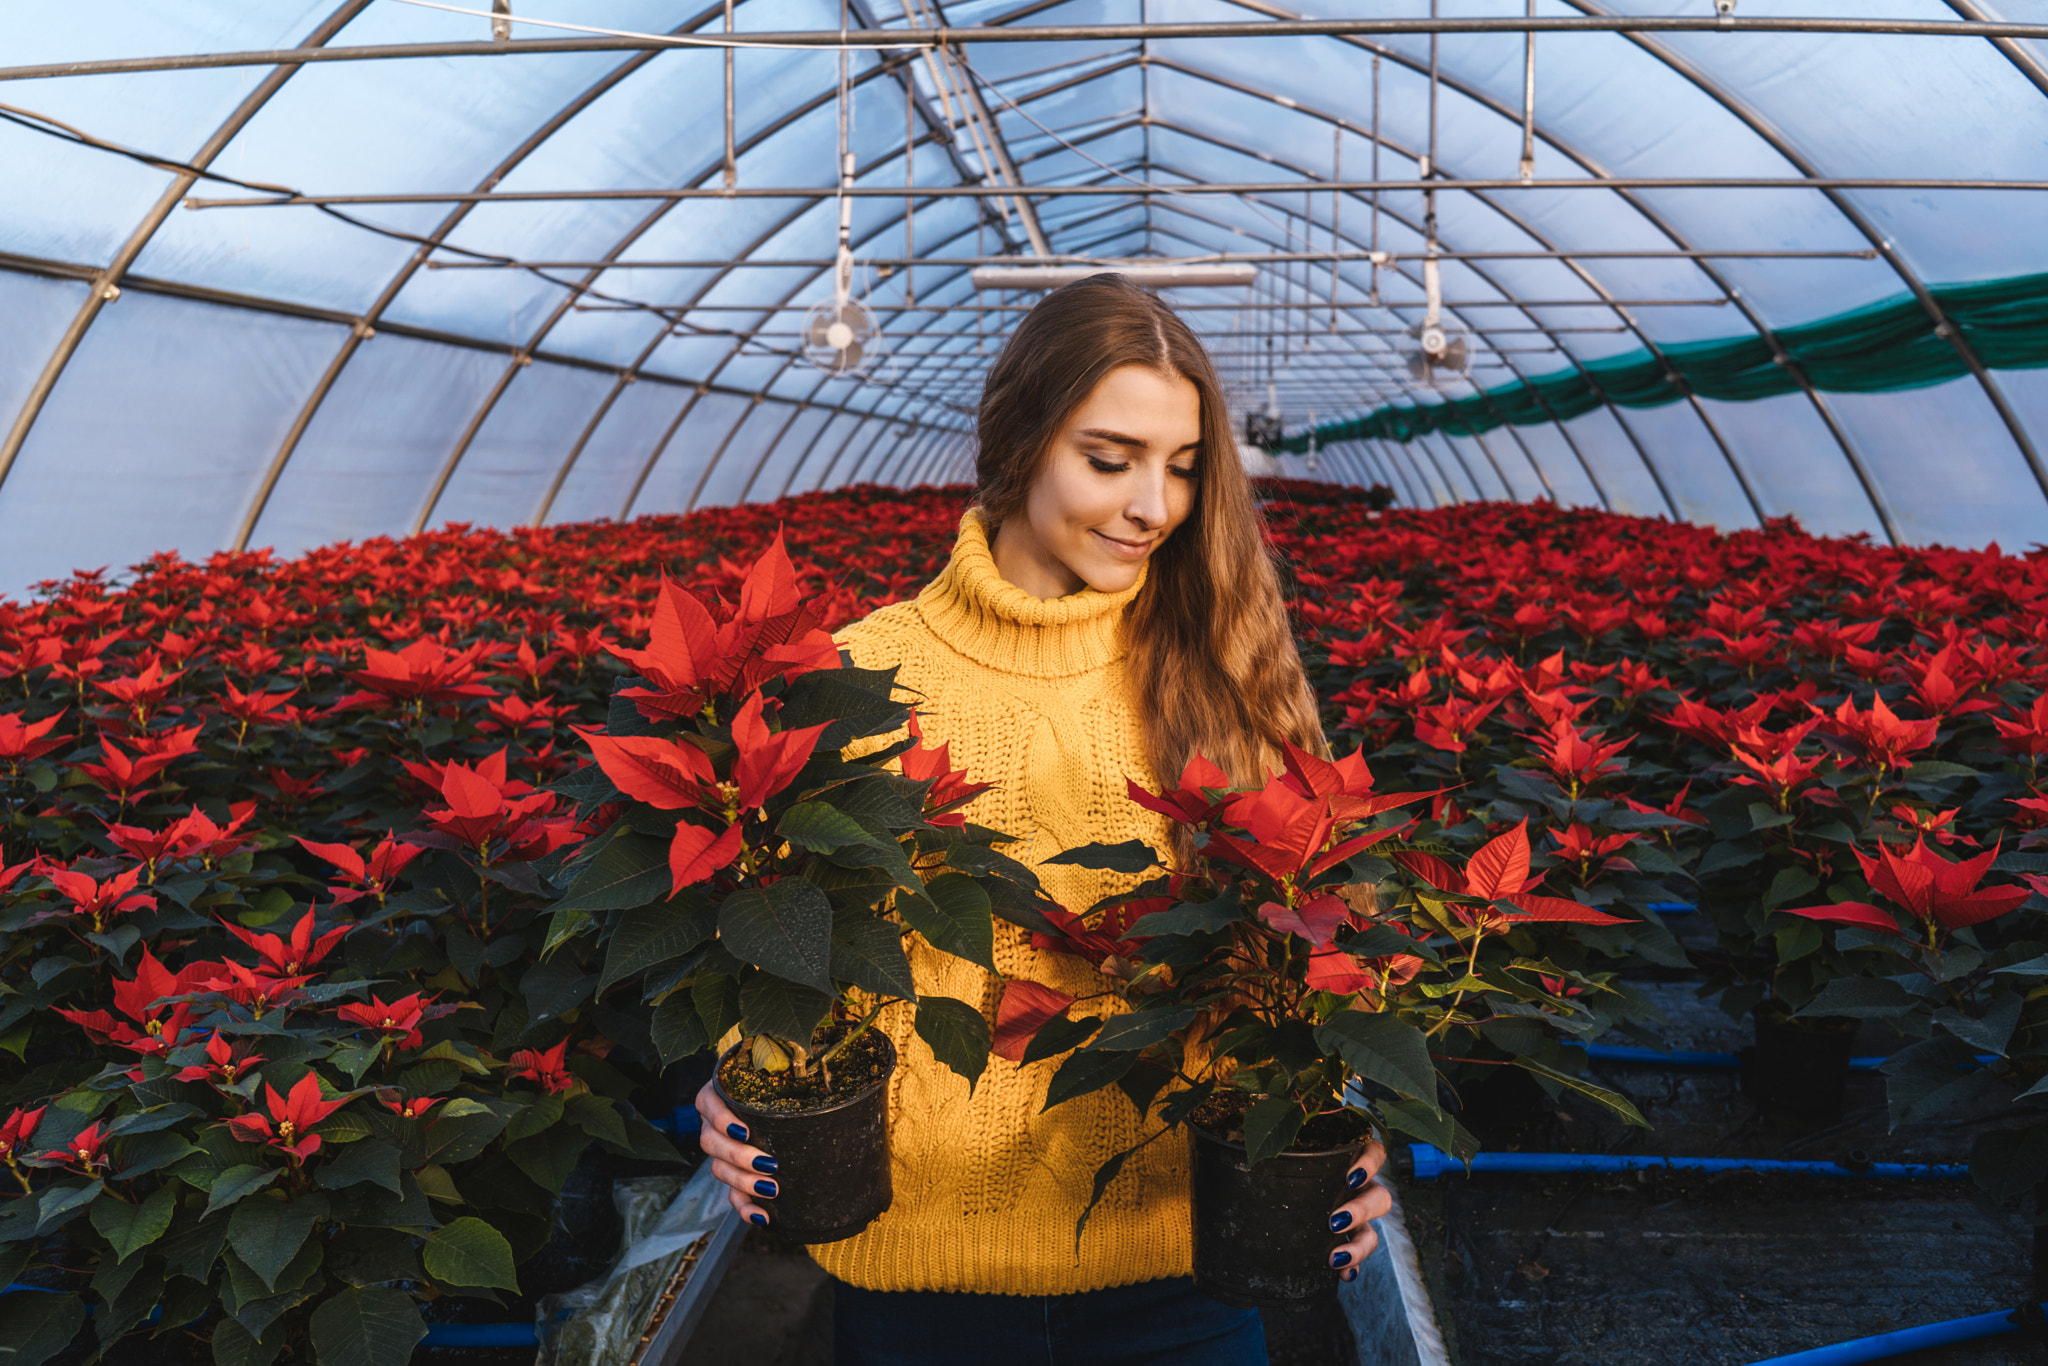 Woman in greenhouse hold poinsettia in pots.